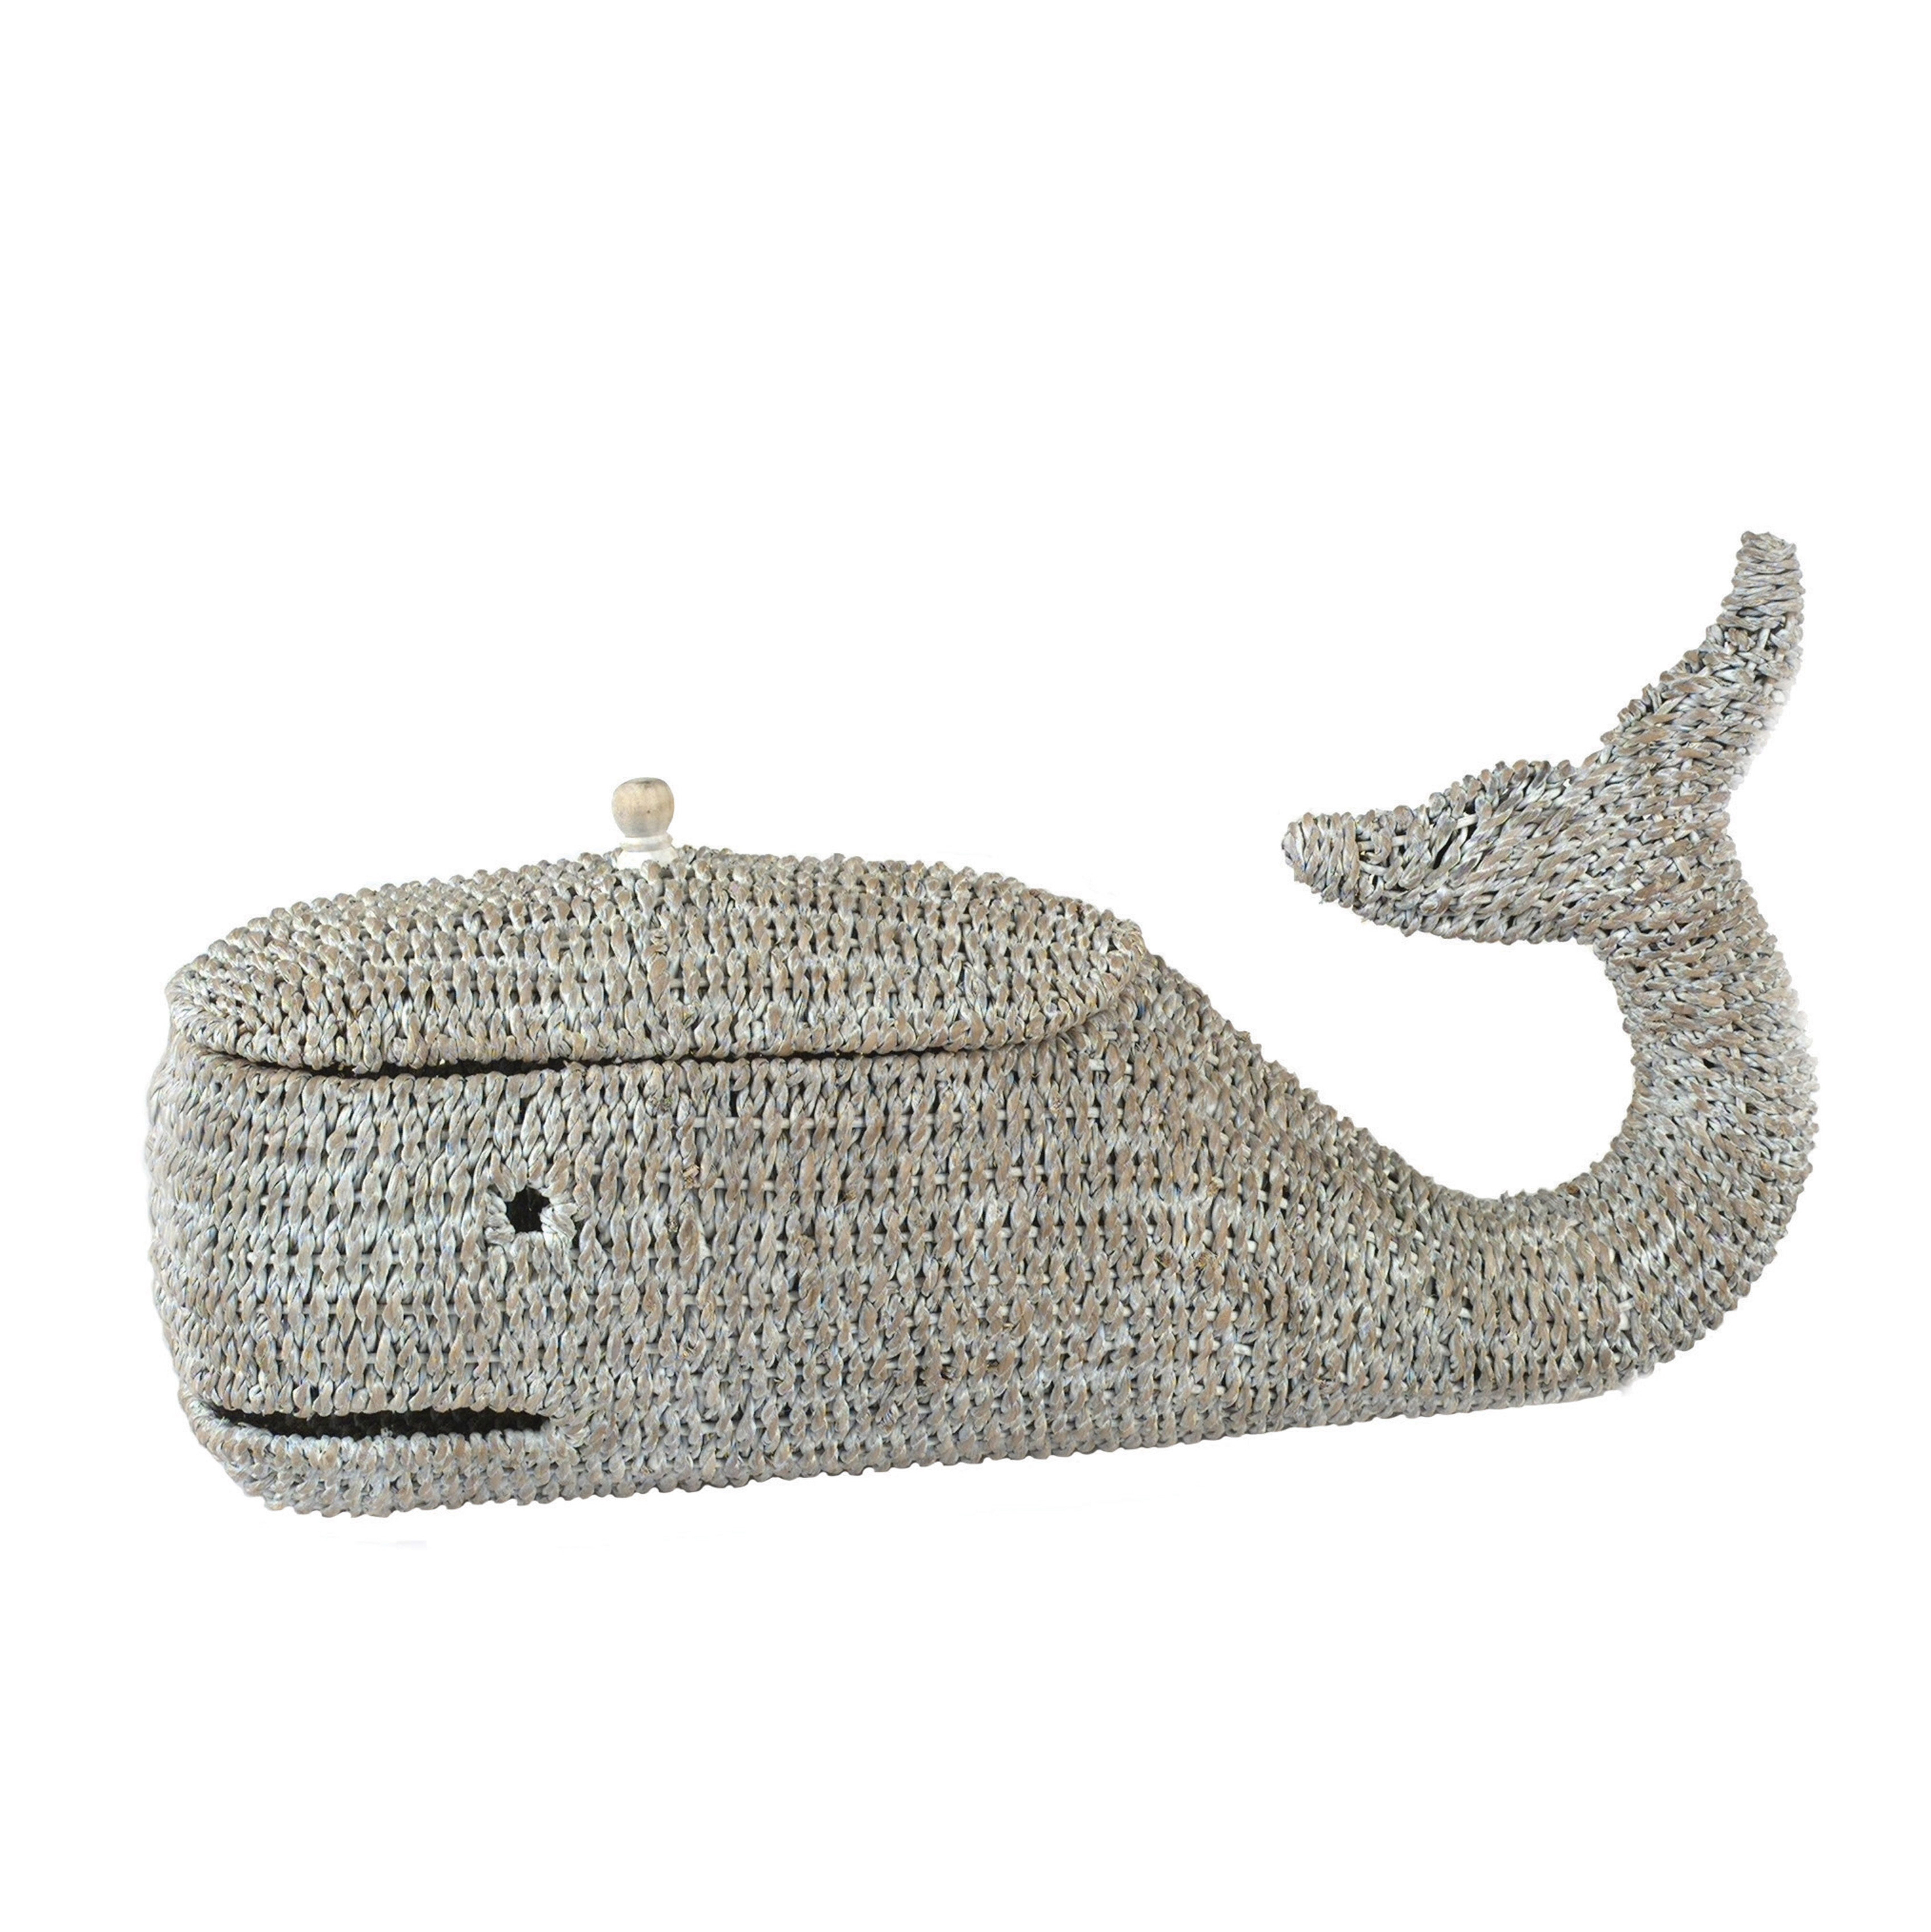 Bankuan Rope Whale Box with Lid - Nomad Home